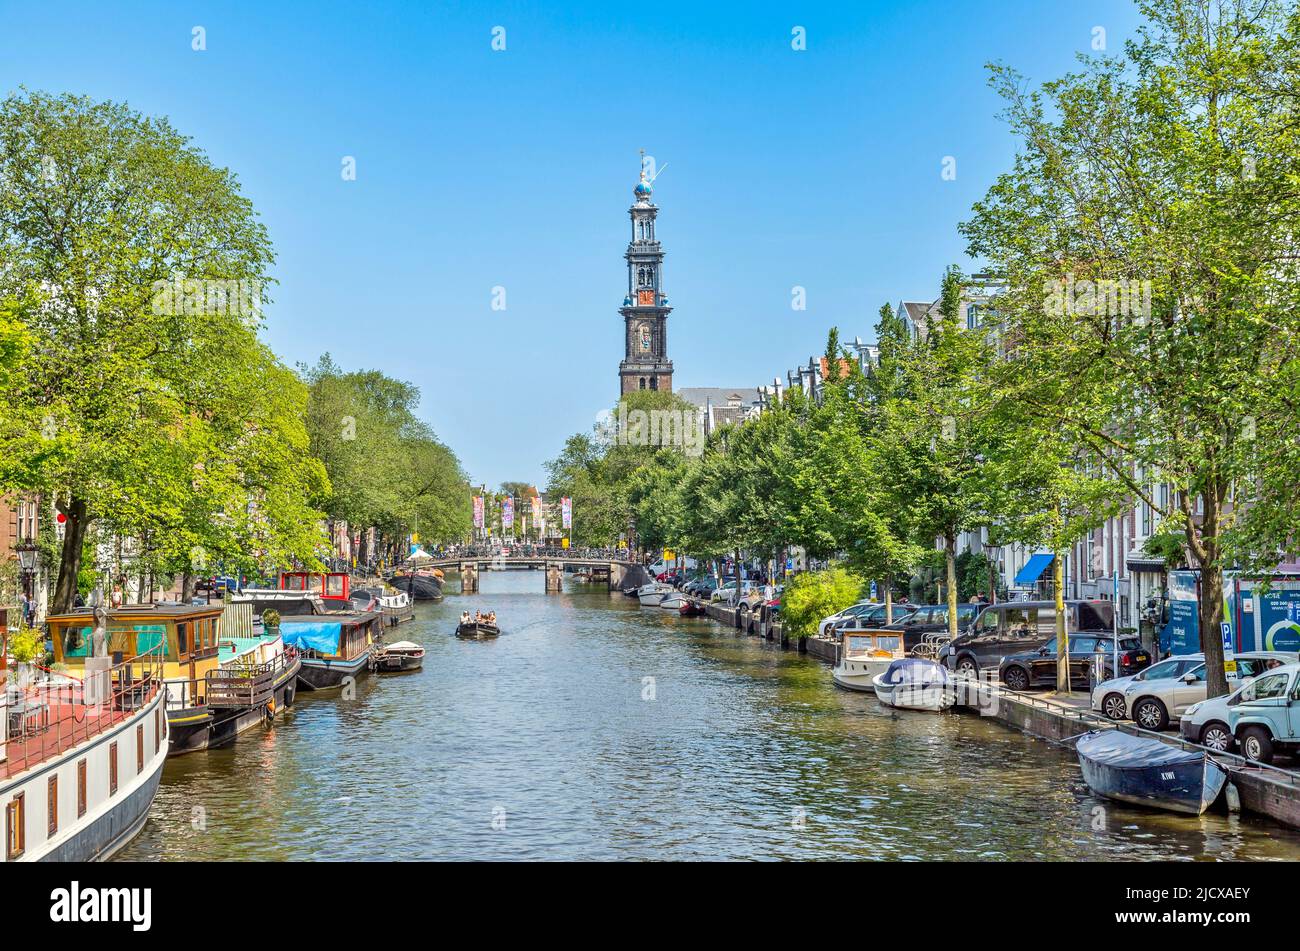 Westerkerk Church on the Prinsengracht Canal, Amsterdam, North Holland, The Netherlands, Europe Stock Photo